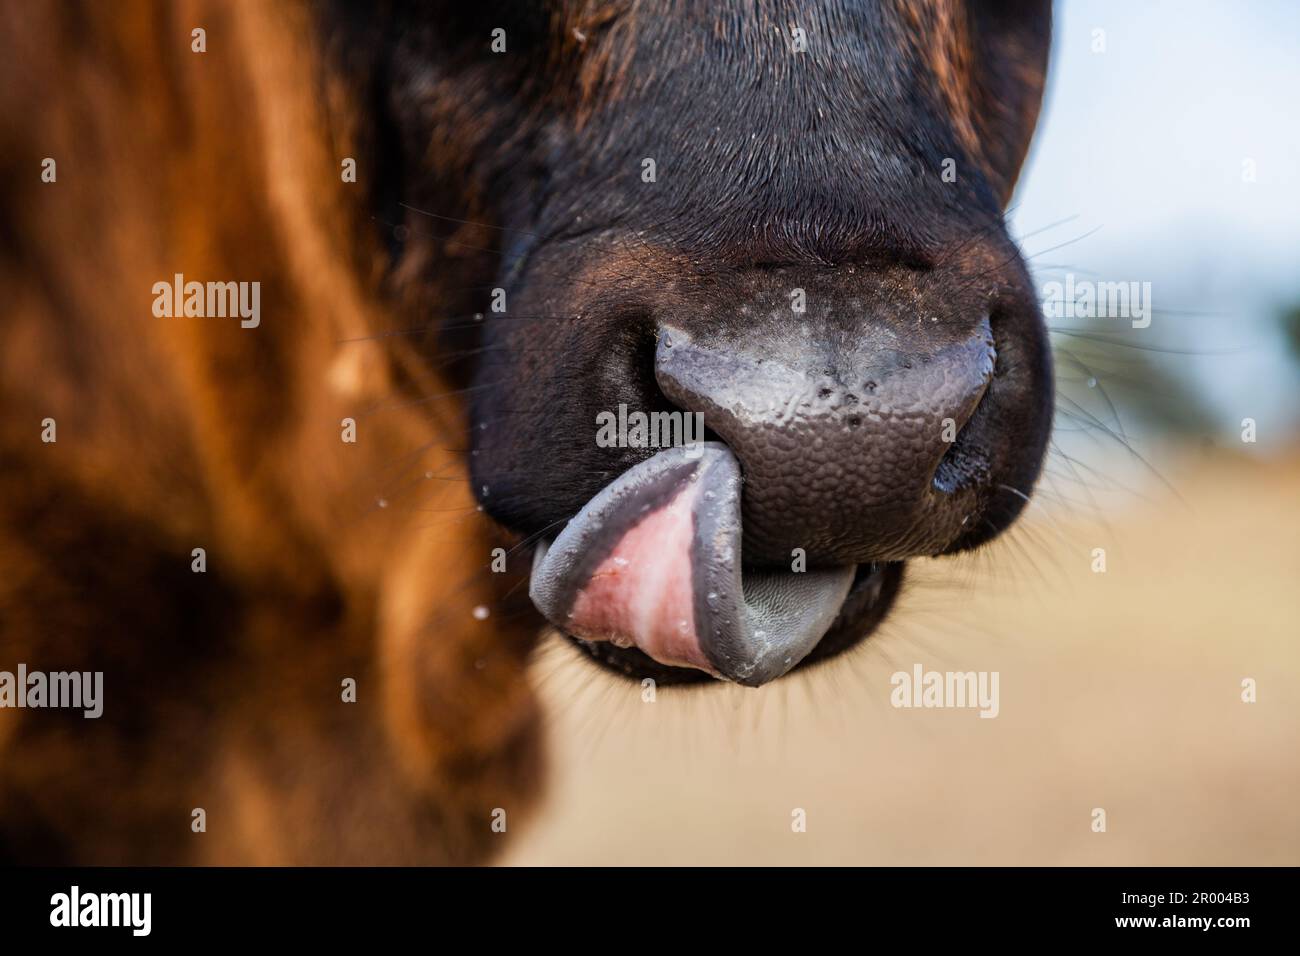 Close up of the nose of a young calf licking its nose Stock Photo